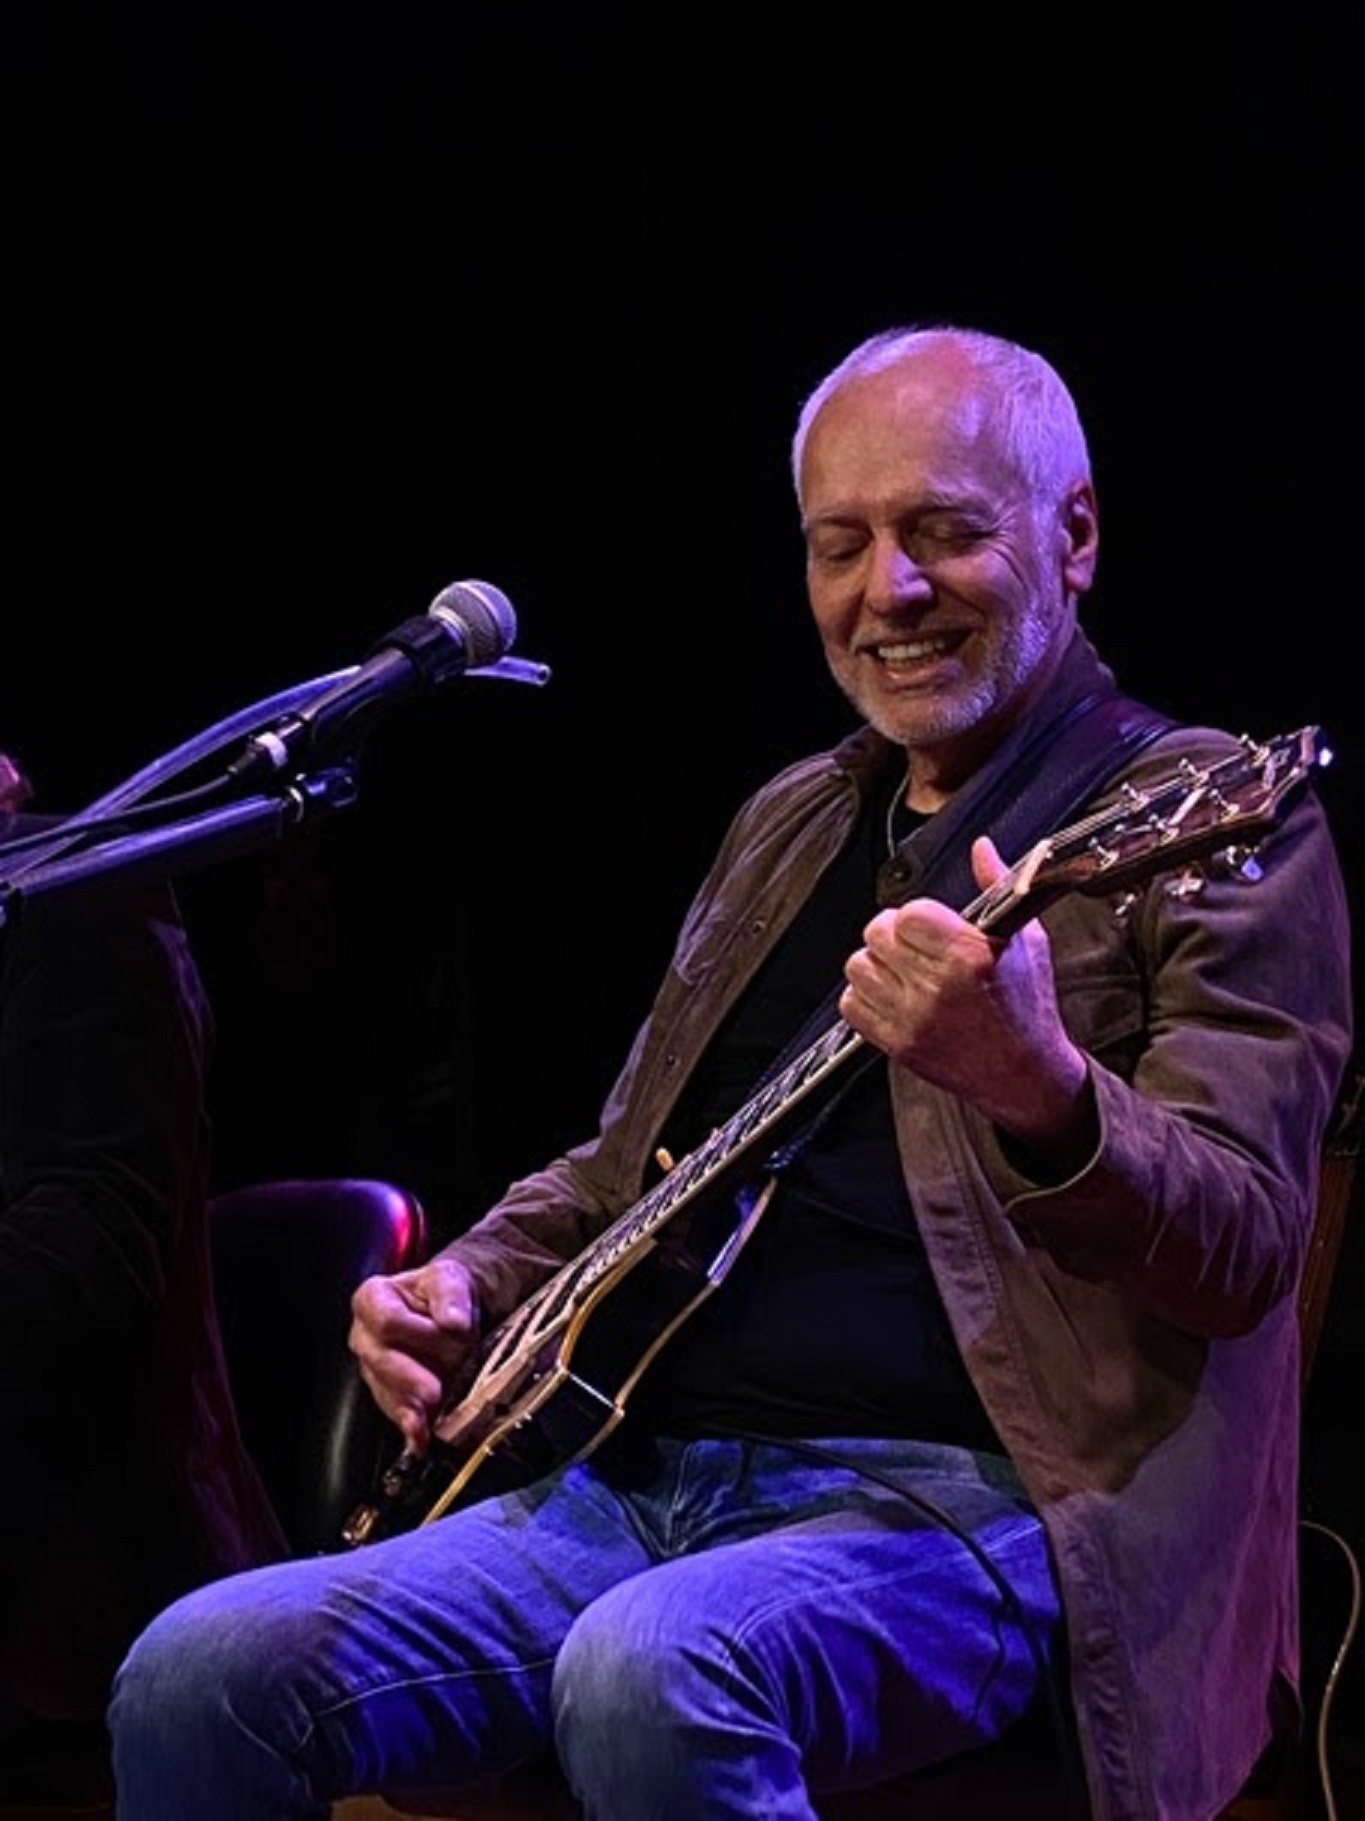 Peter Frampton confirms "The Positively Thankful Tour"